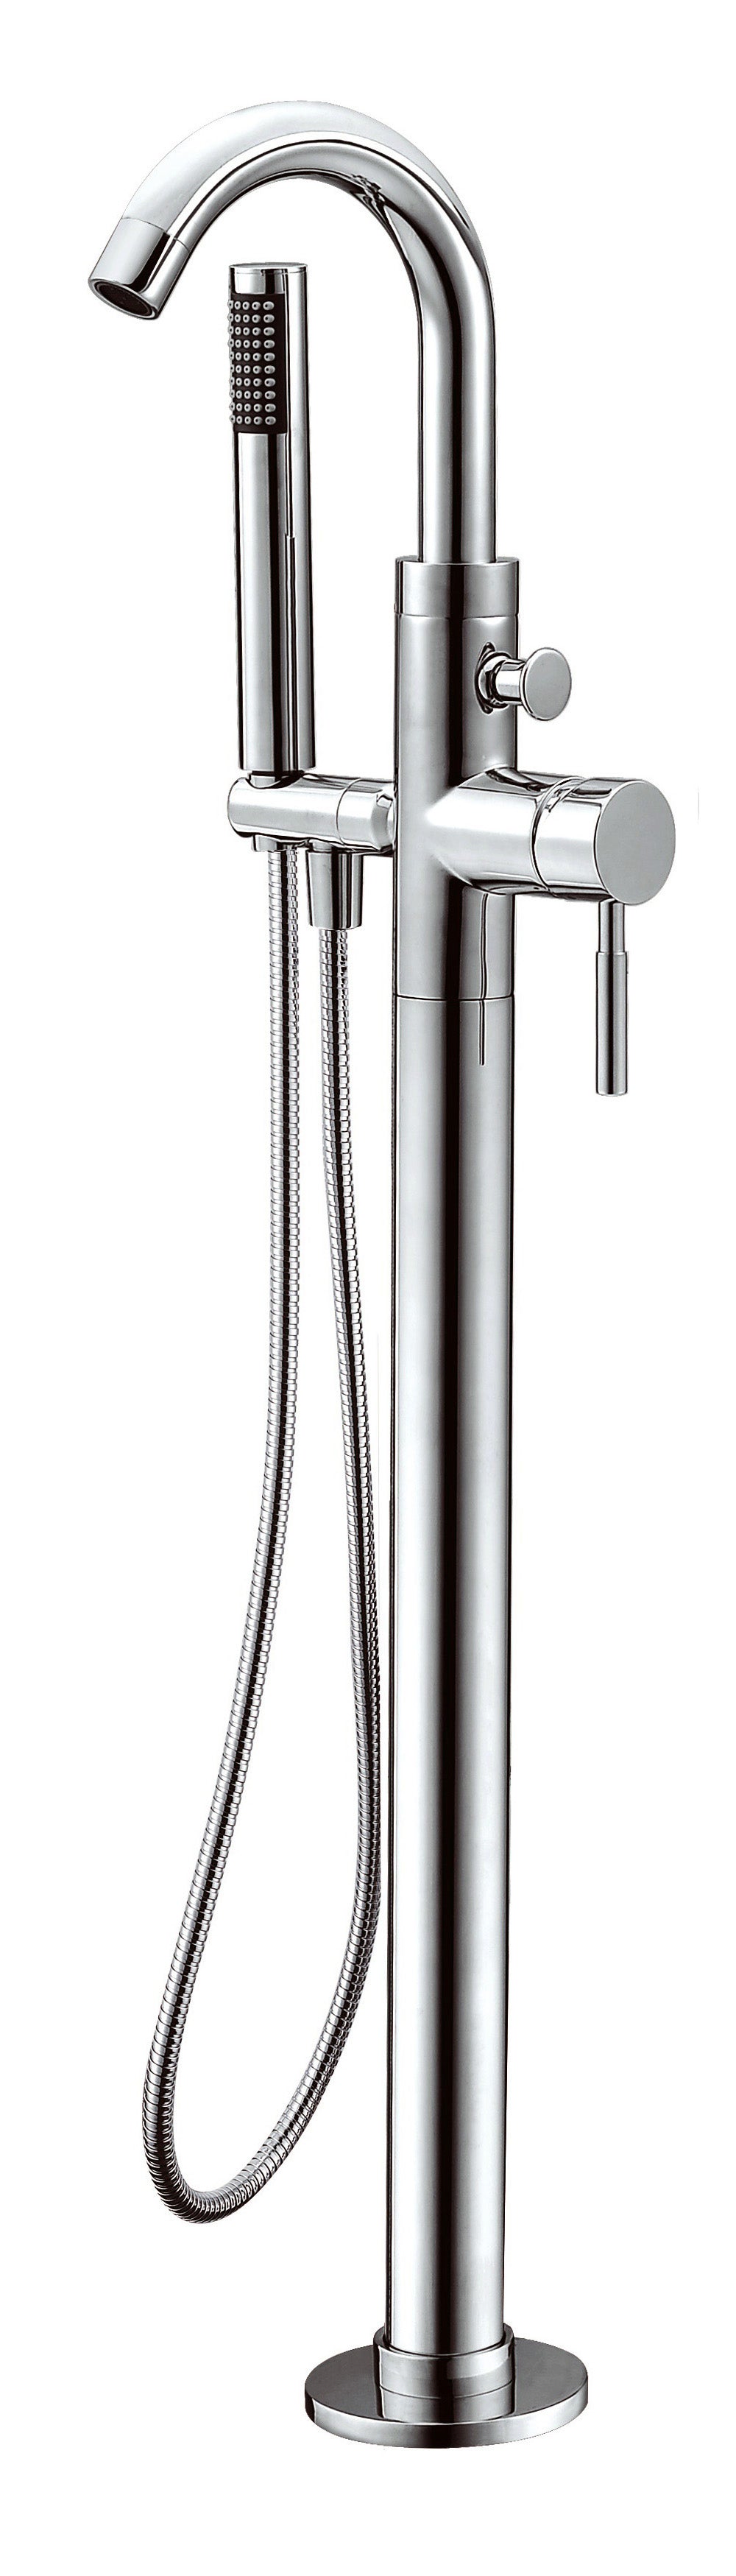 ALFI brand AB2534-PC Polished Chrome Single Lever Floor Mounted Tub Filler Mixer w Hand Held Shower Head